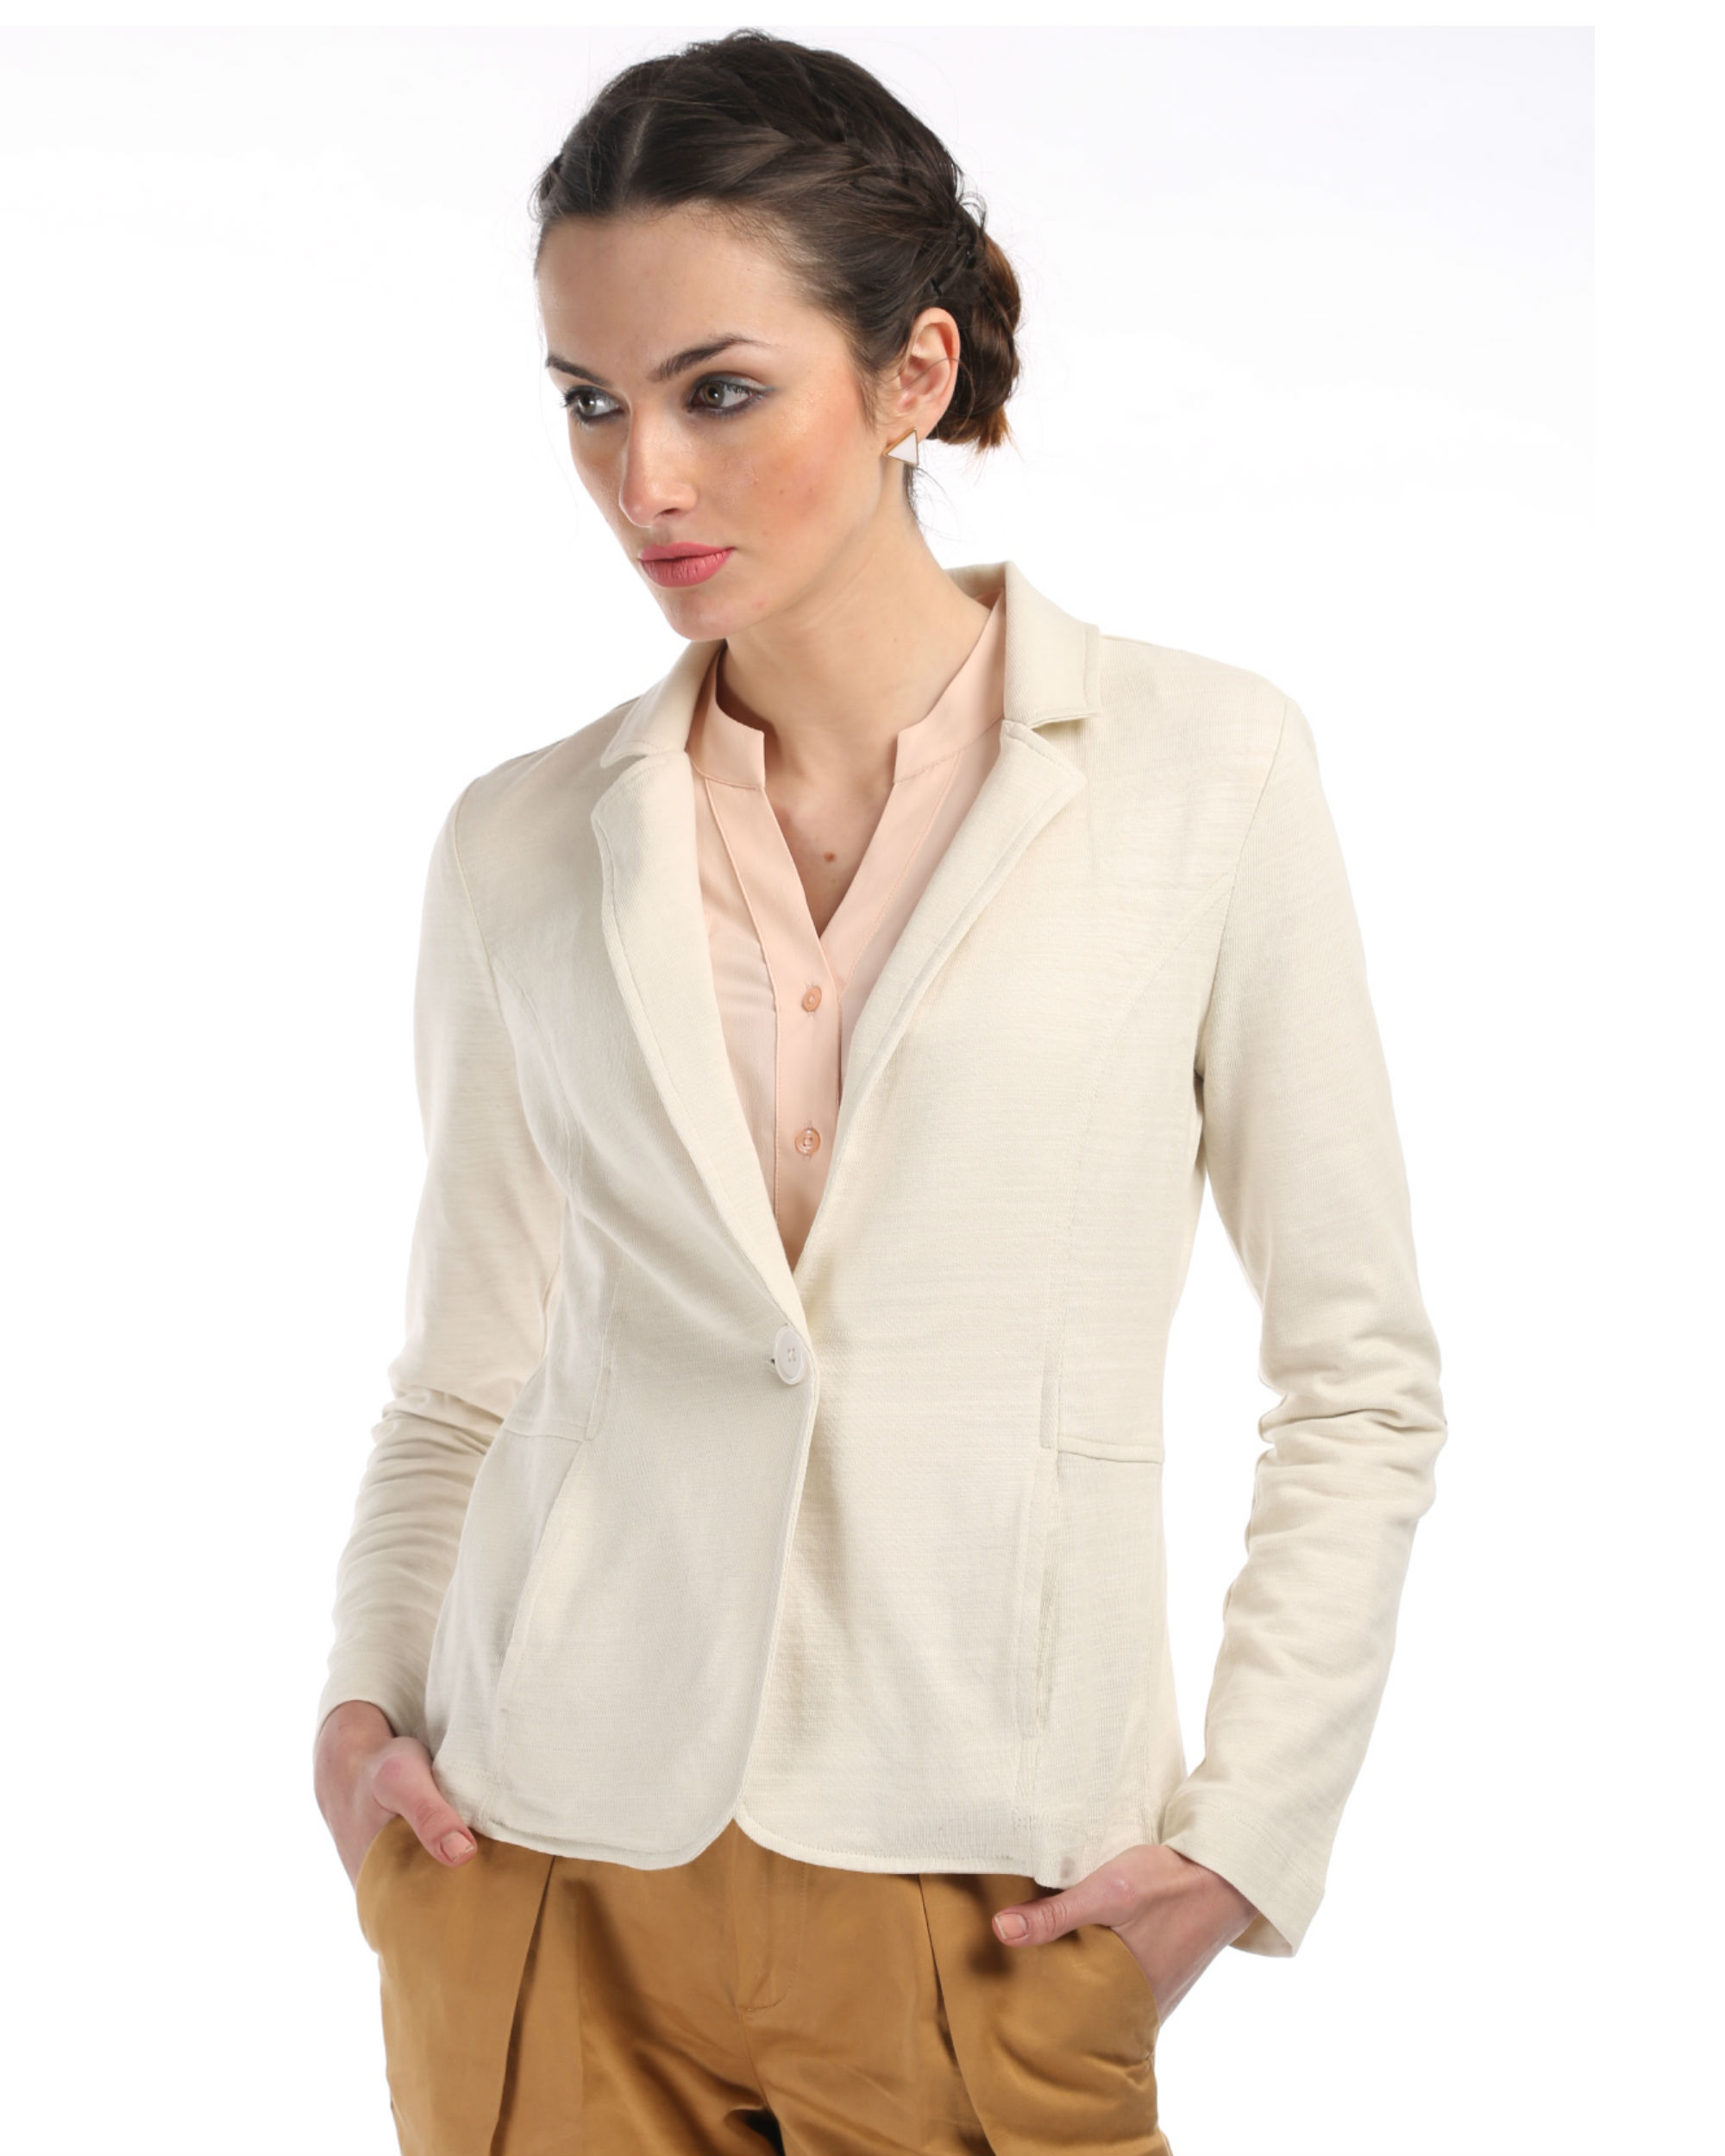 Ivory knit blazer with elbow patch by POST FOLD | The Secret Label